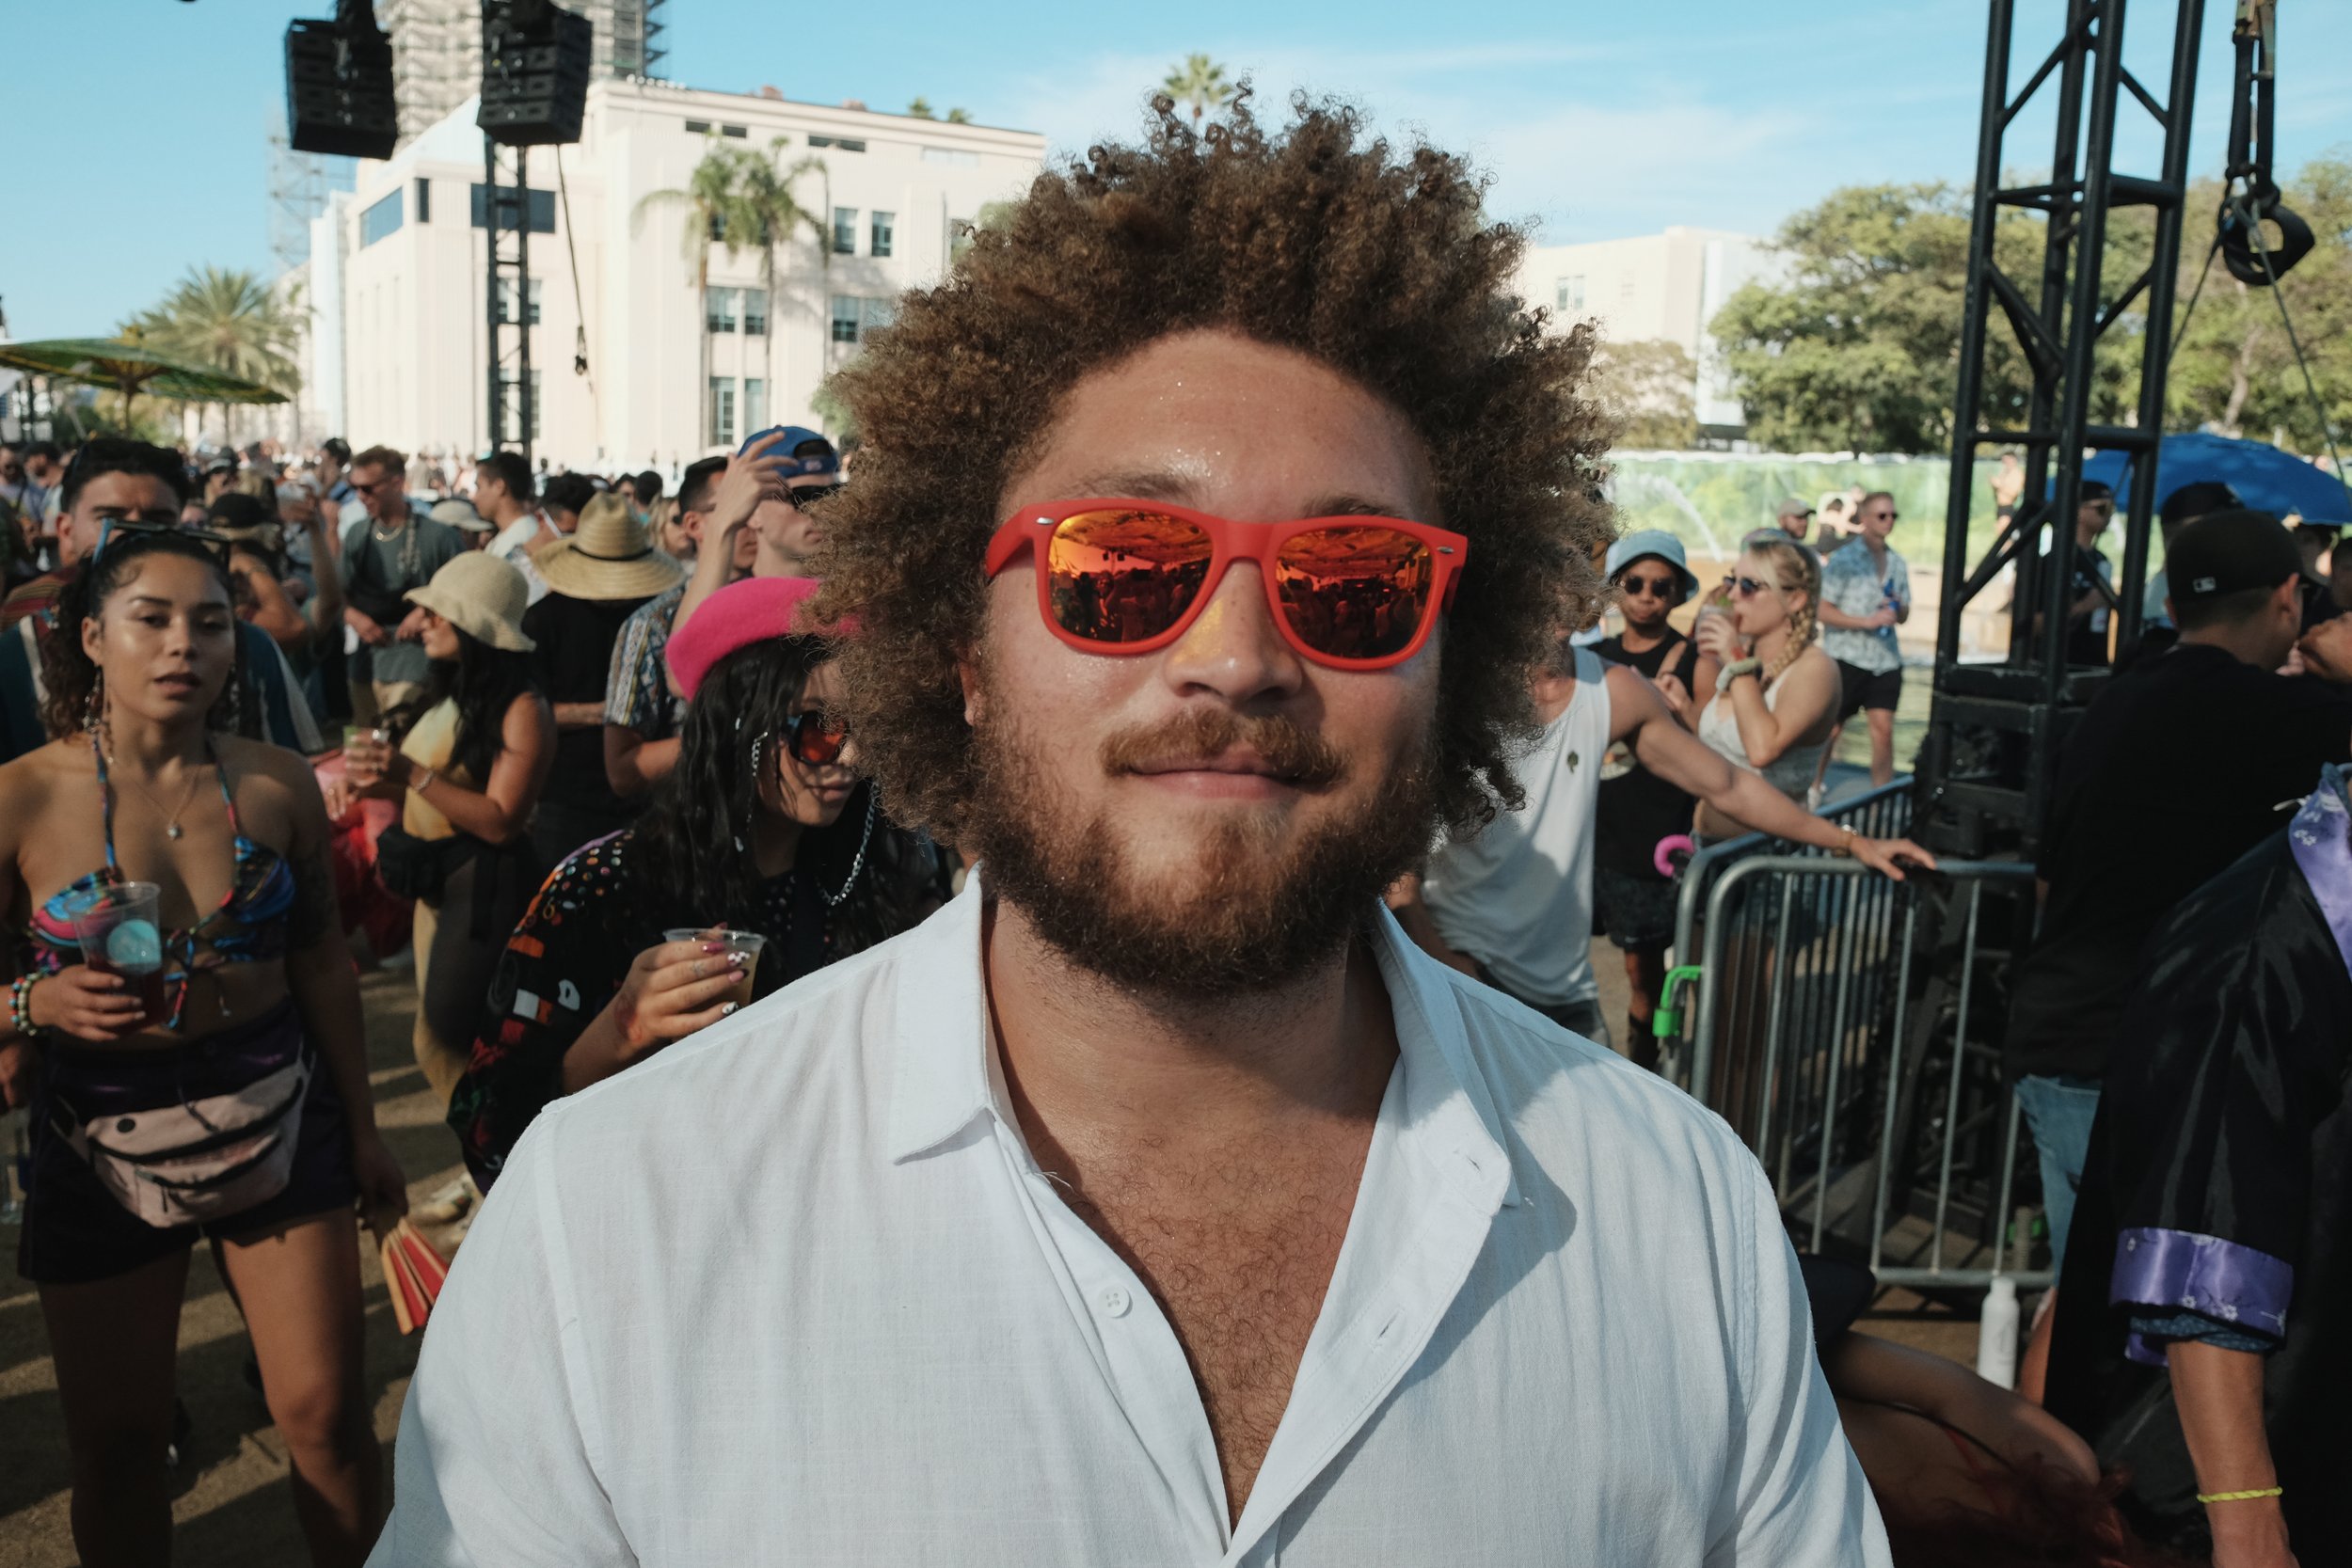 crssd - blaine in the crowd - l.jpg